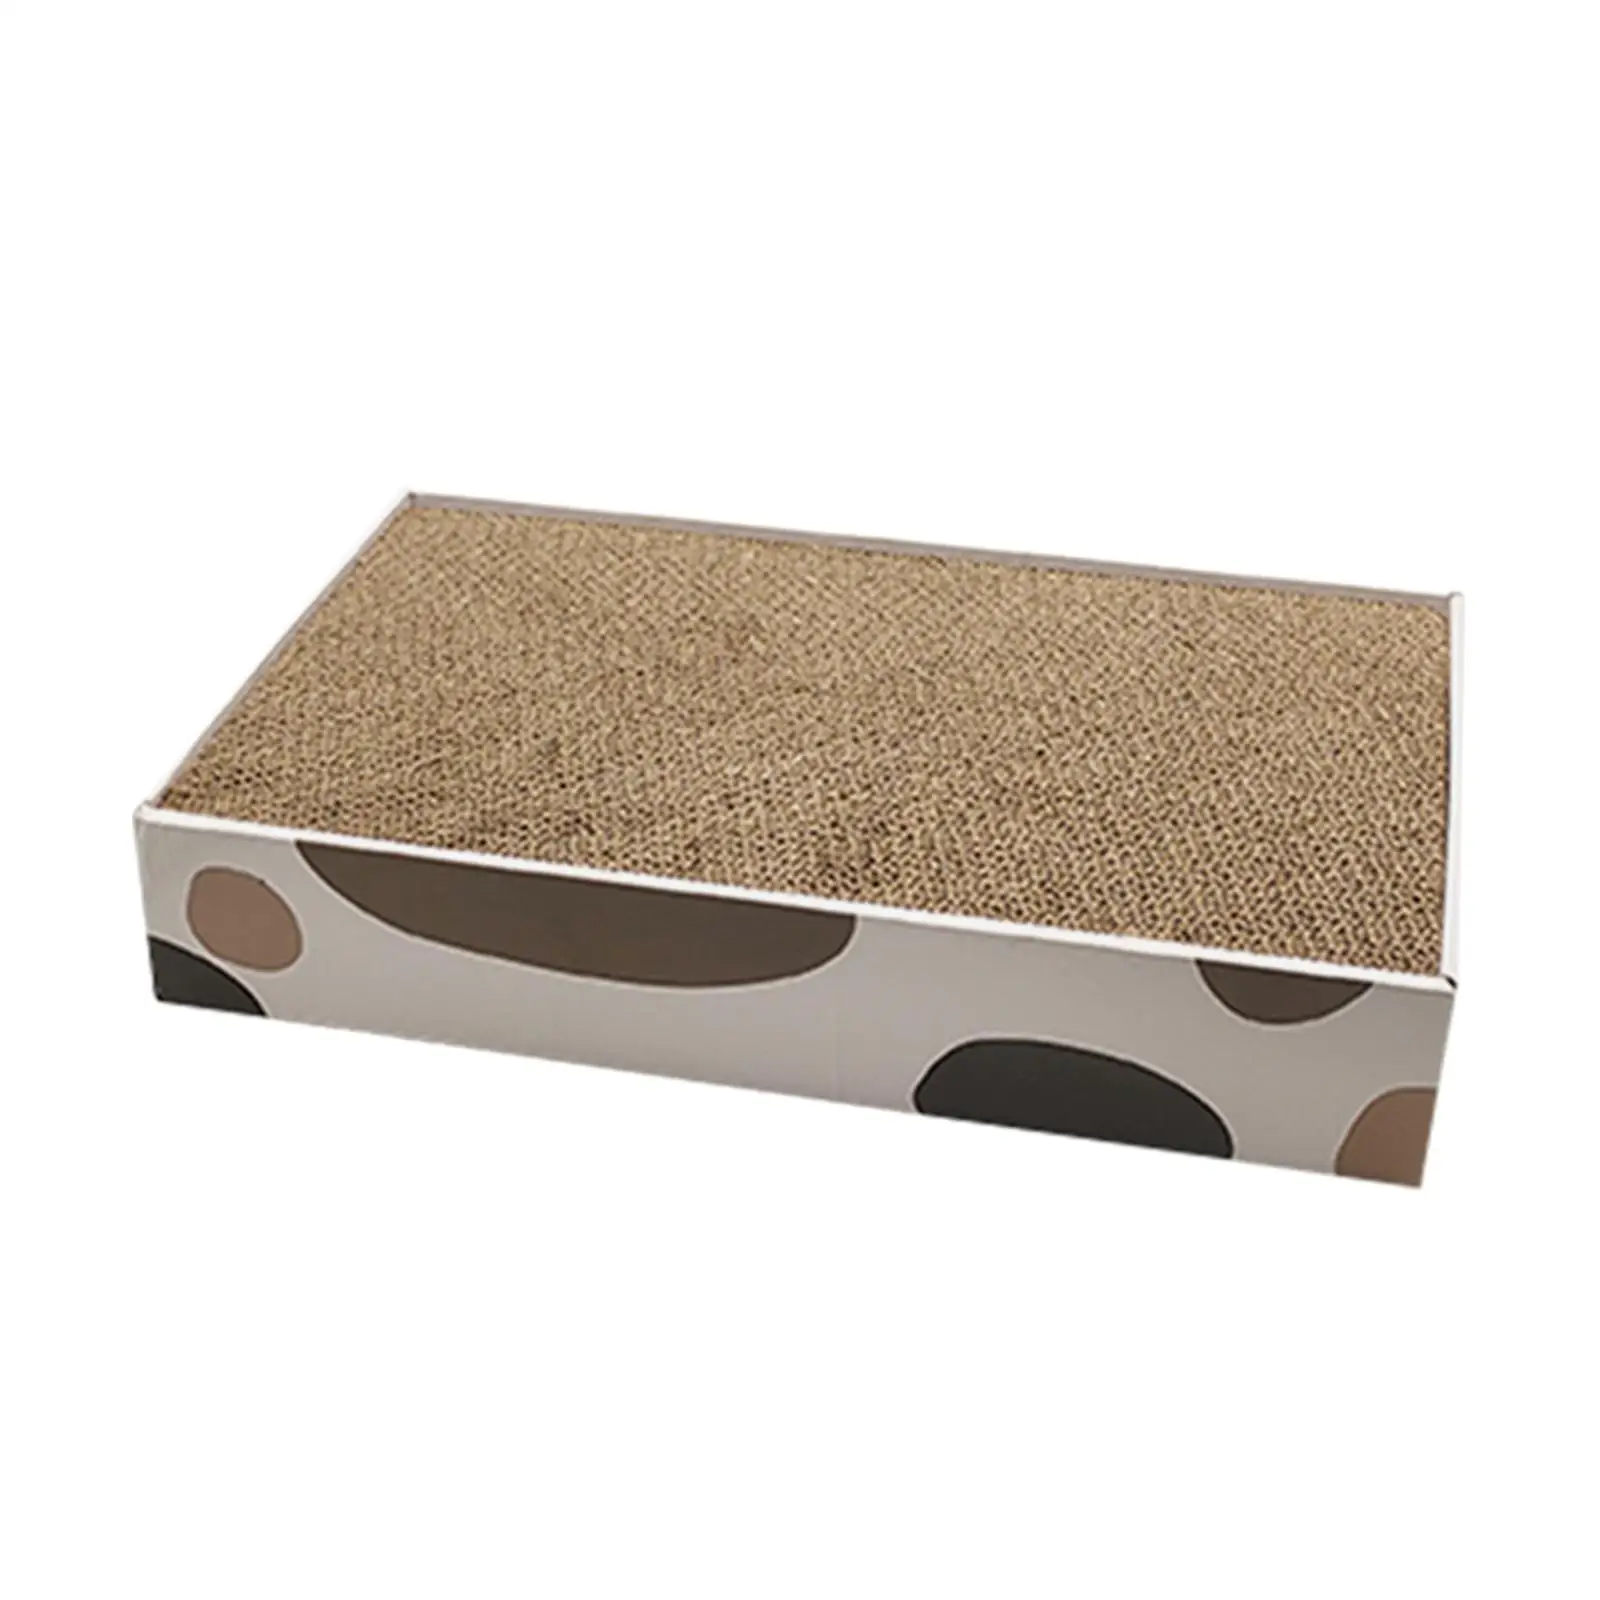 Reversible Pet Cat Scratcher Cardboard Scratching Pads with Box Corrugated Paper Replacement Wear Resistant Kitten Scratch Bed